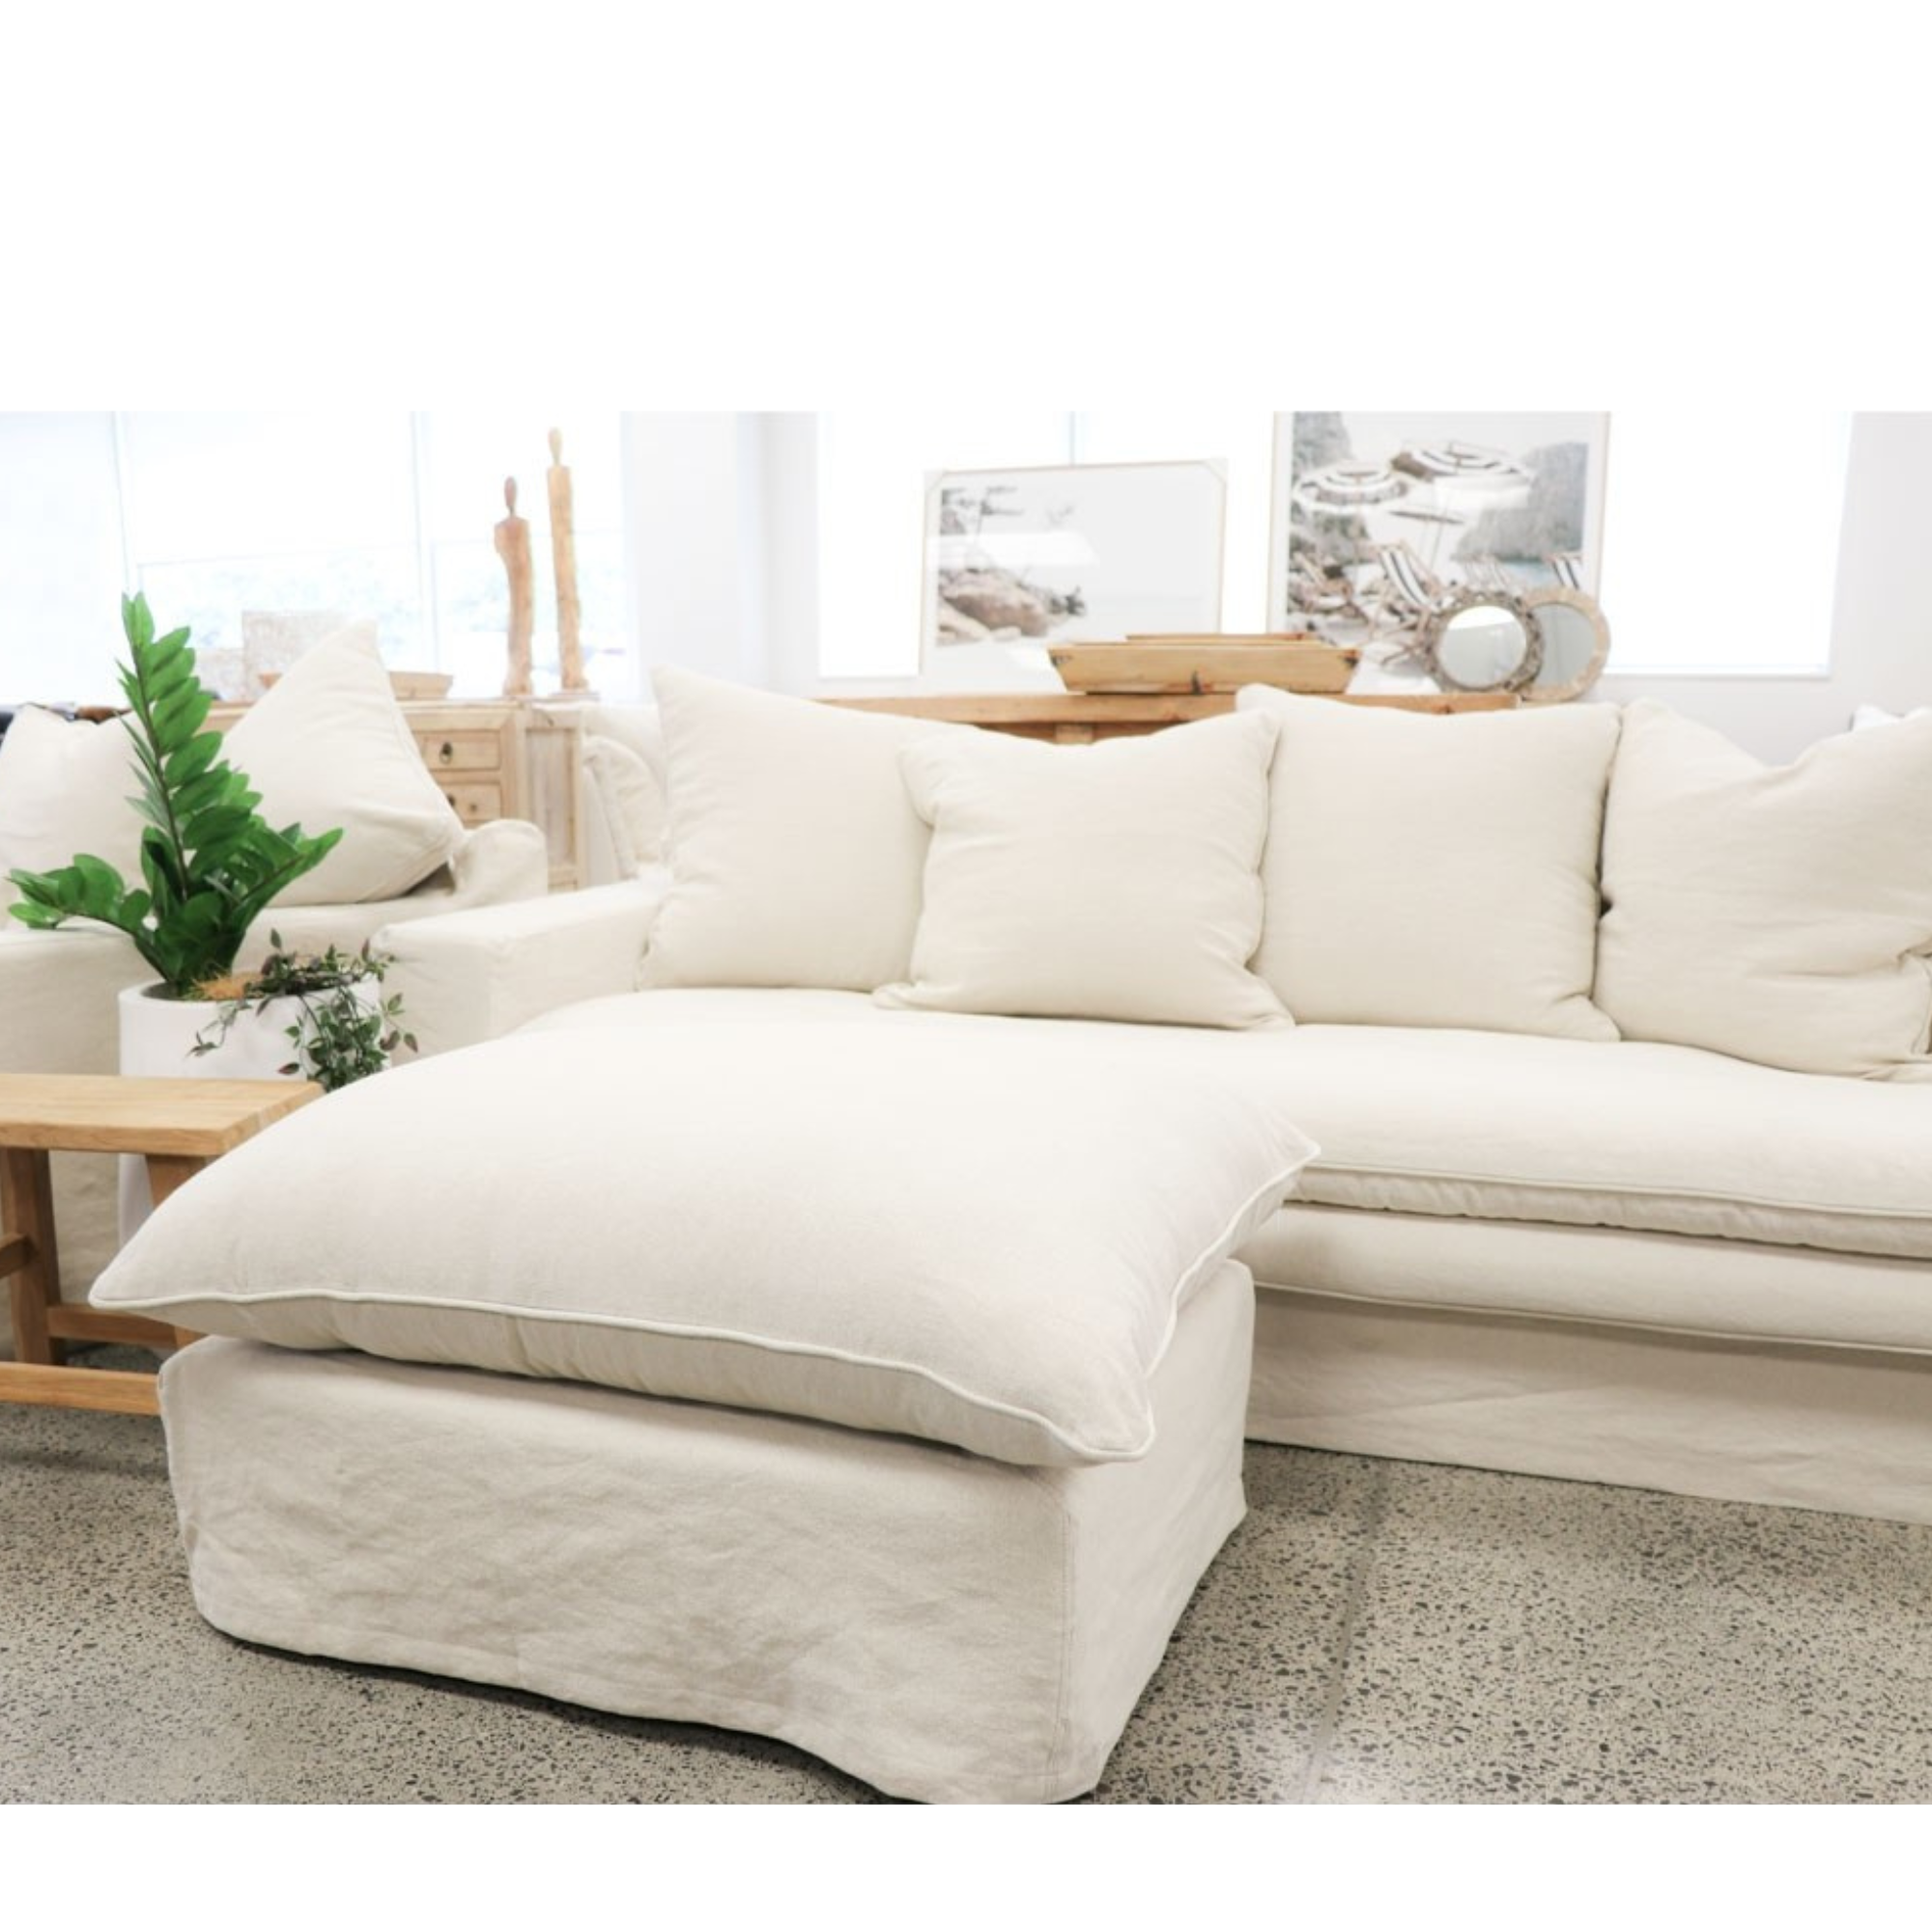 LOTUS SLIPCOVER 2.5 SEATER CHAISE | RIGHT OR LEFT HAND CHAISE